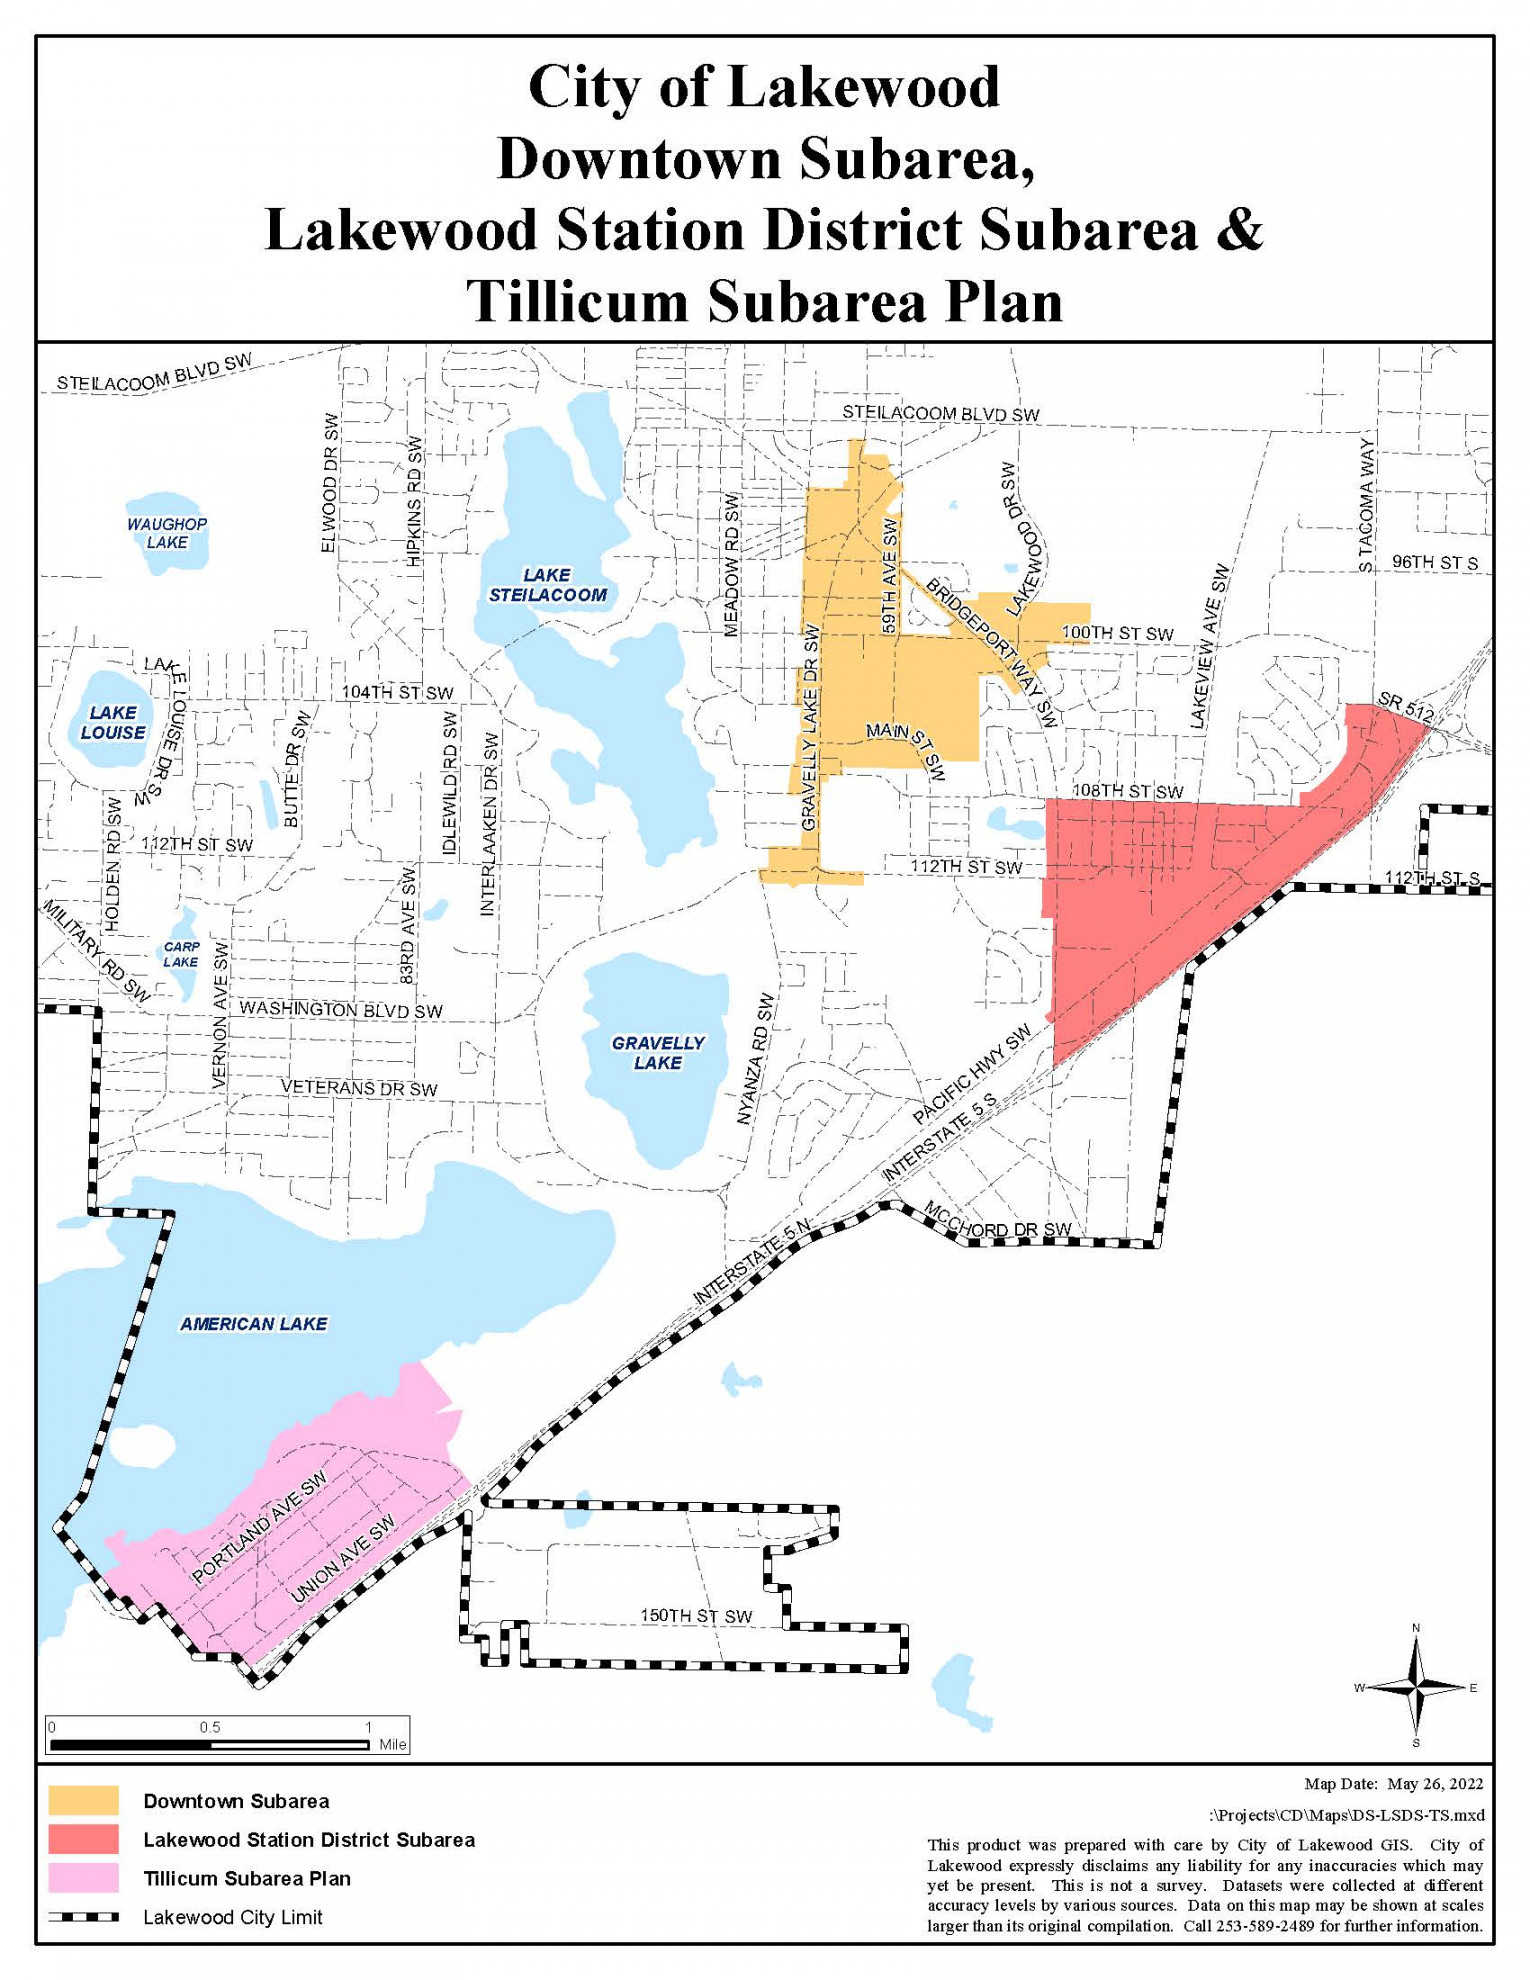 Long-Range Planning and Special Projects - City of Lakewood